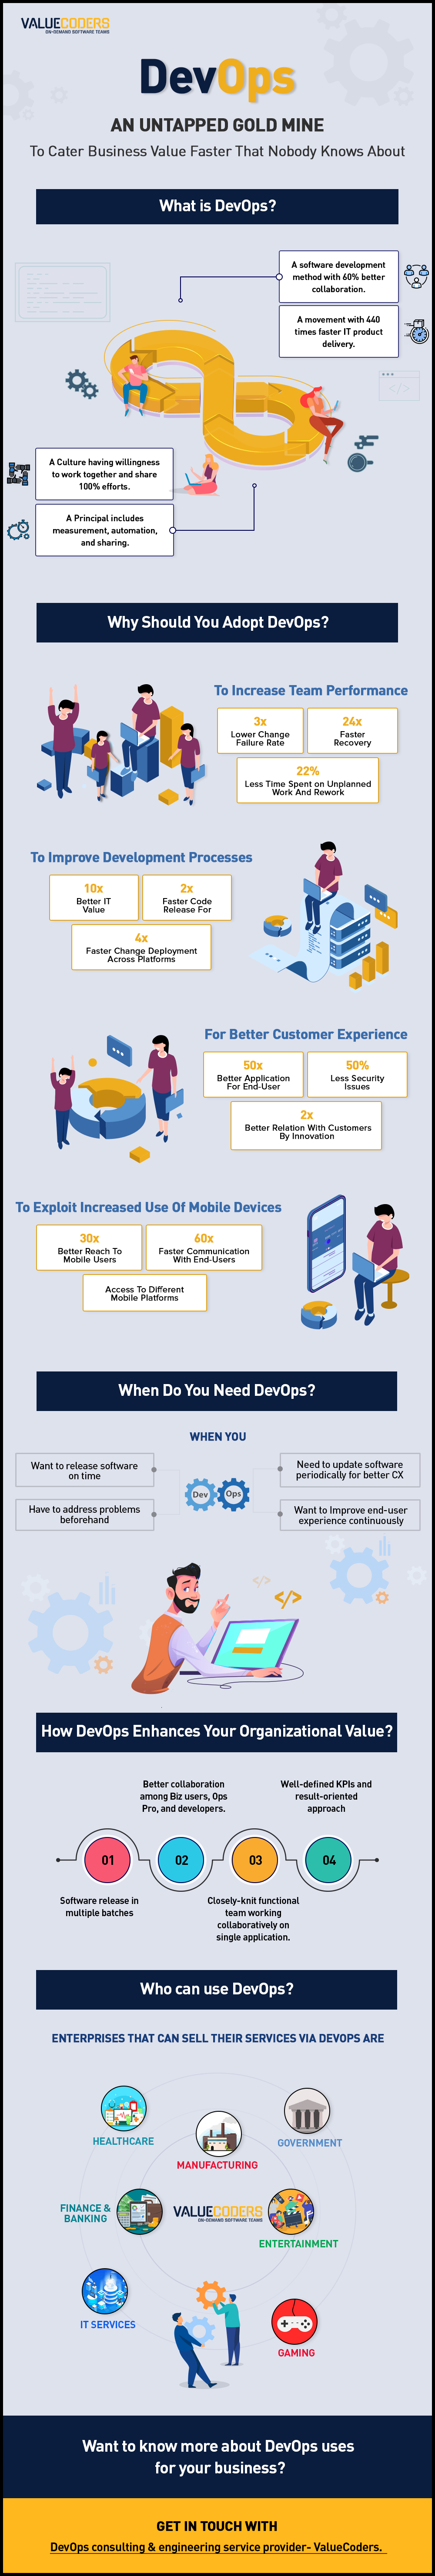 Why Should You Adopt DevOps To Deliver Business Value Rapidly? 